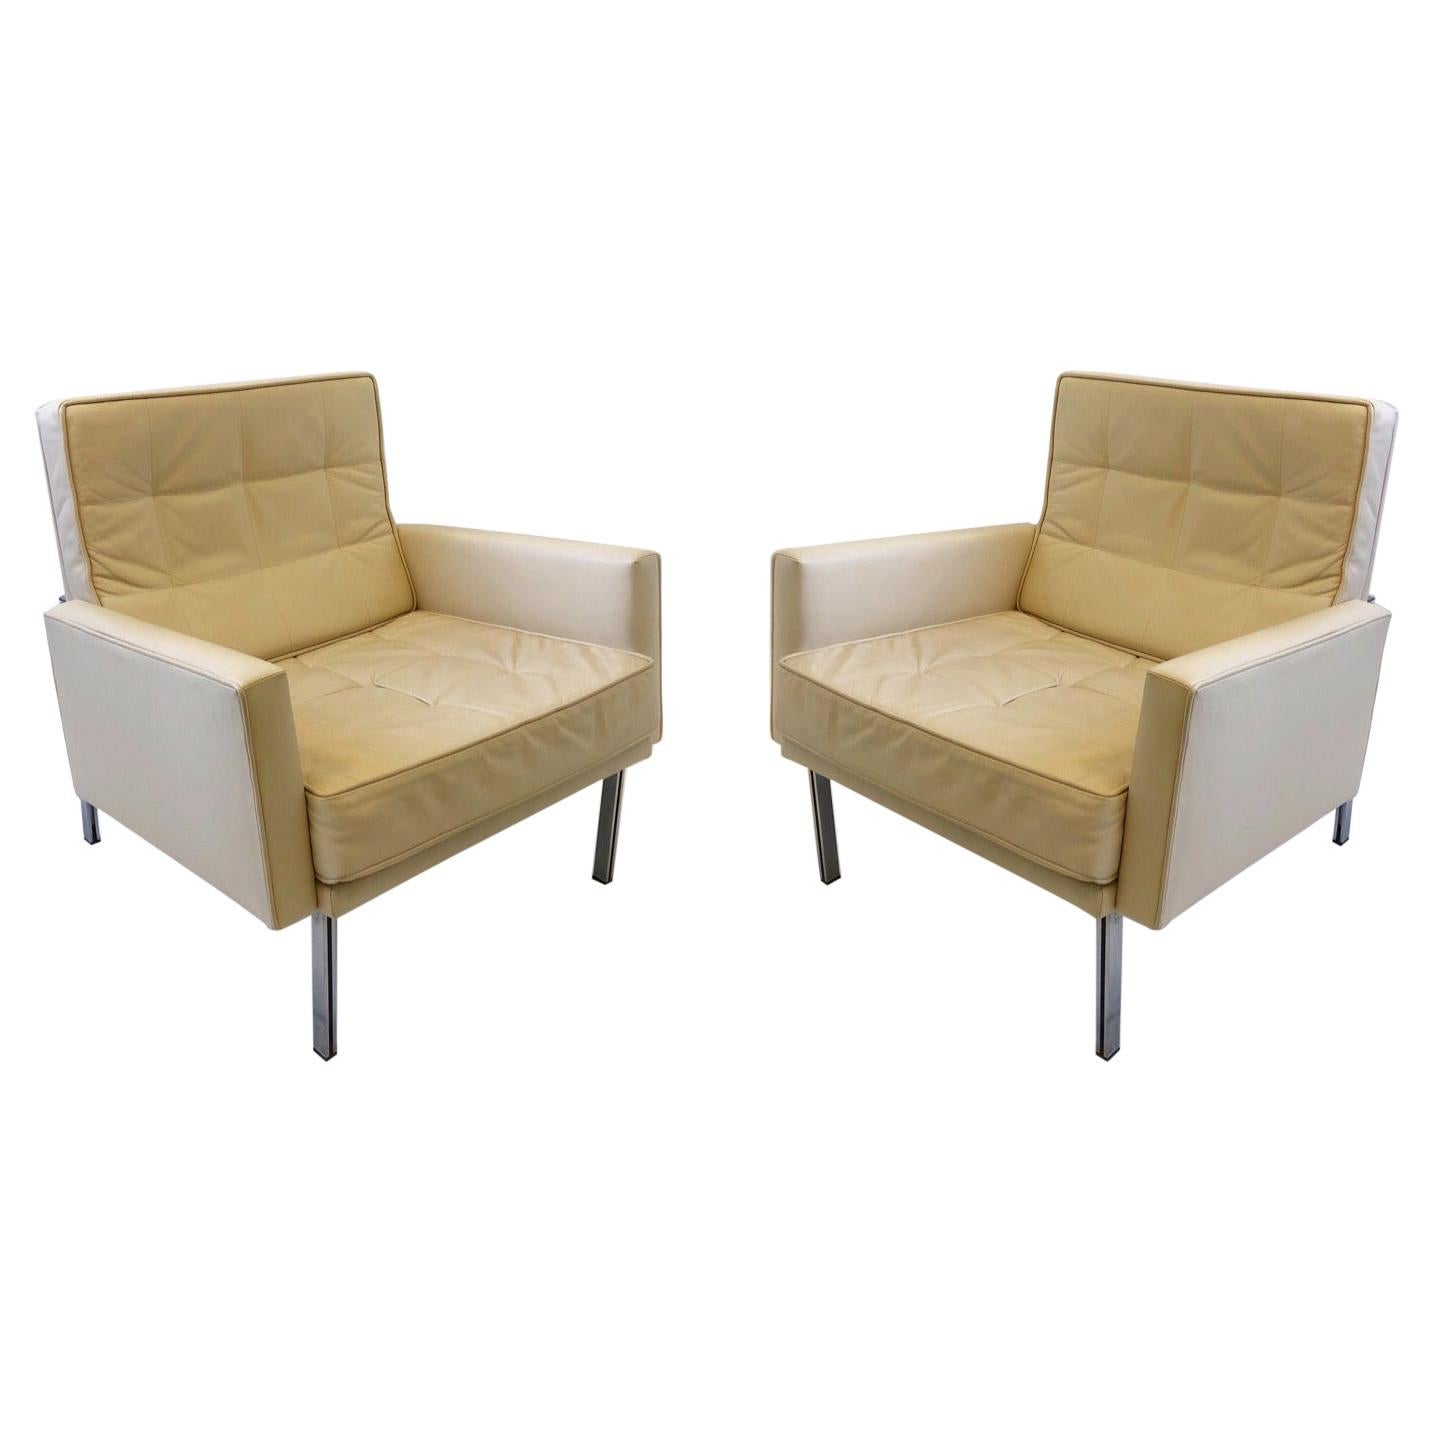 Pair of off White Leather and Stainless Steel Lounge Chairs by Florence Knoll